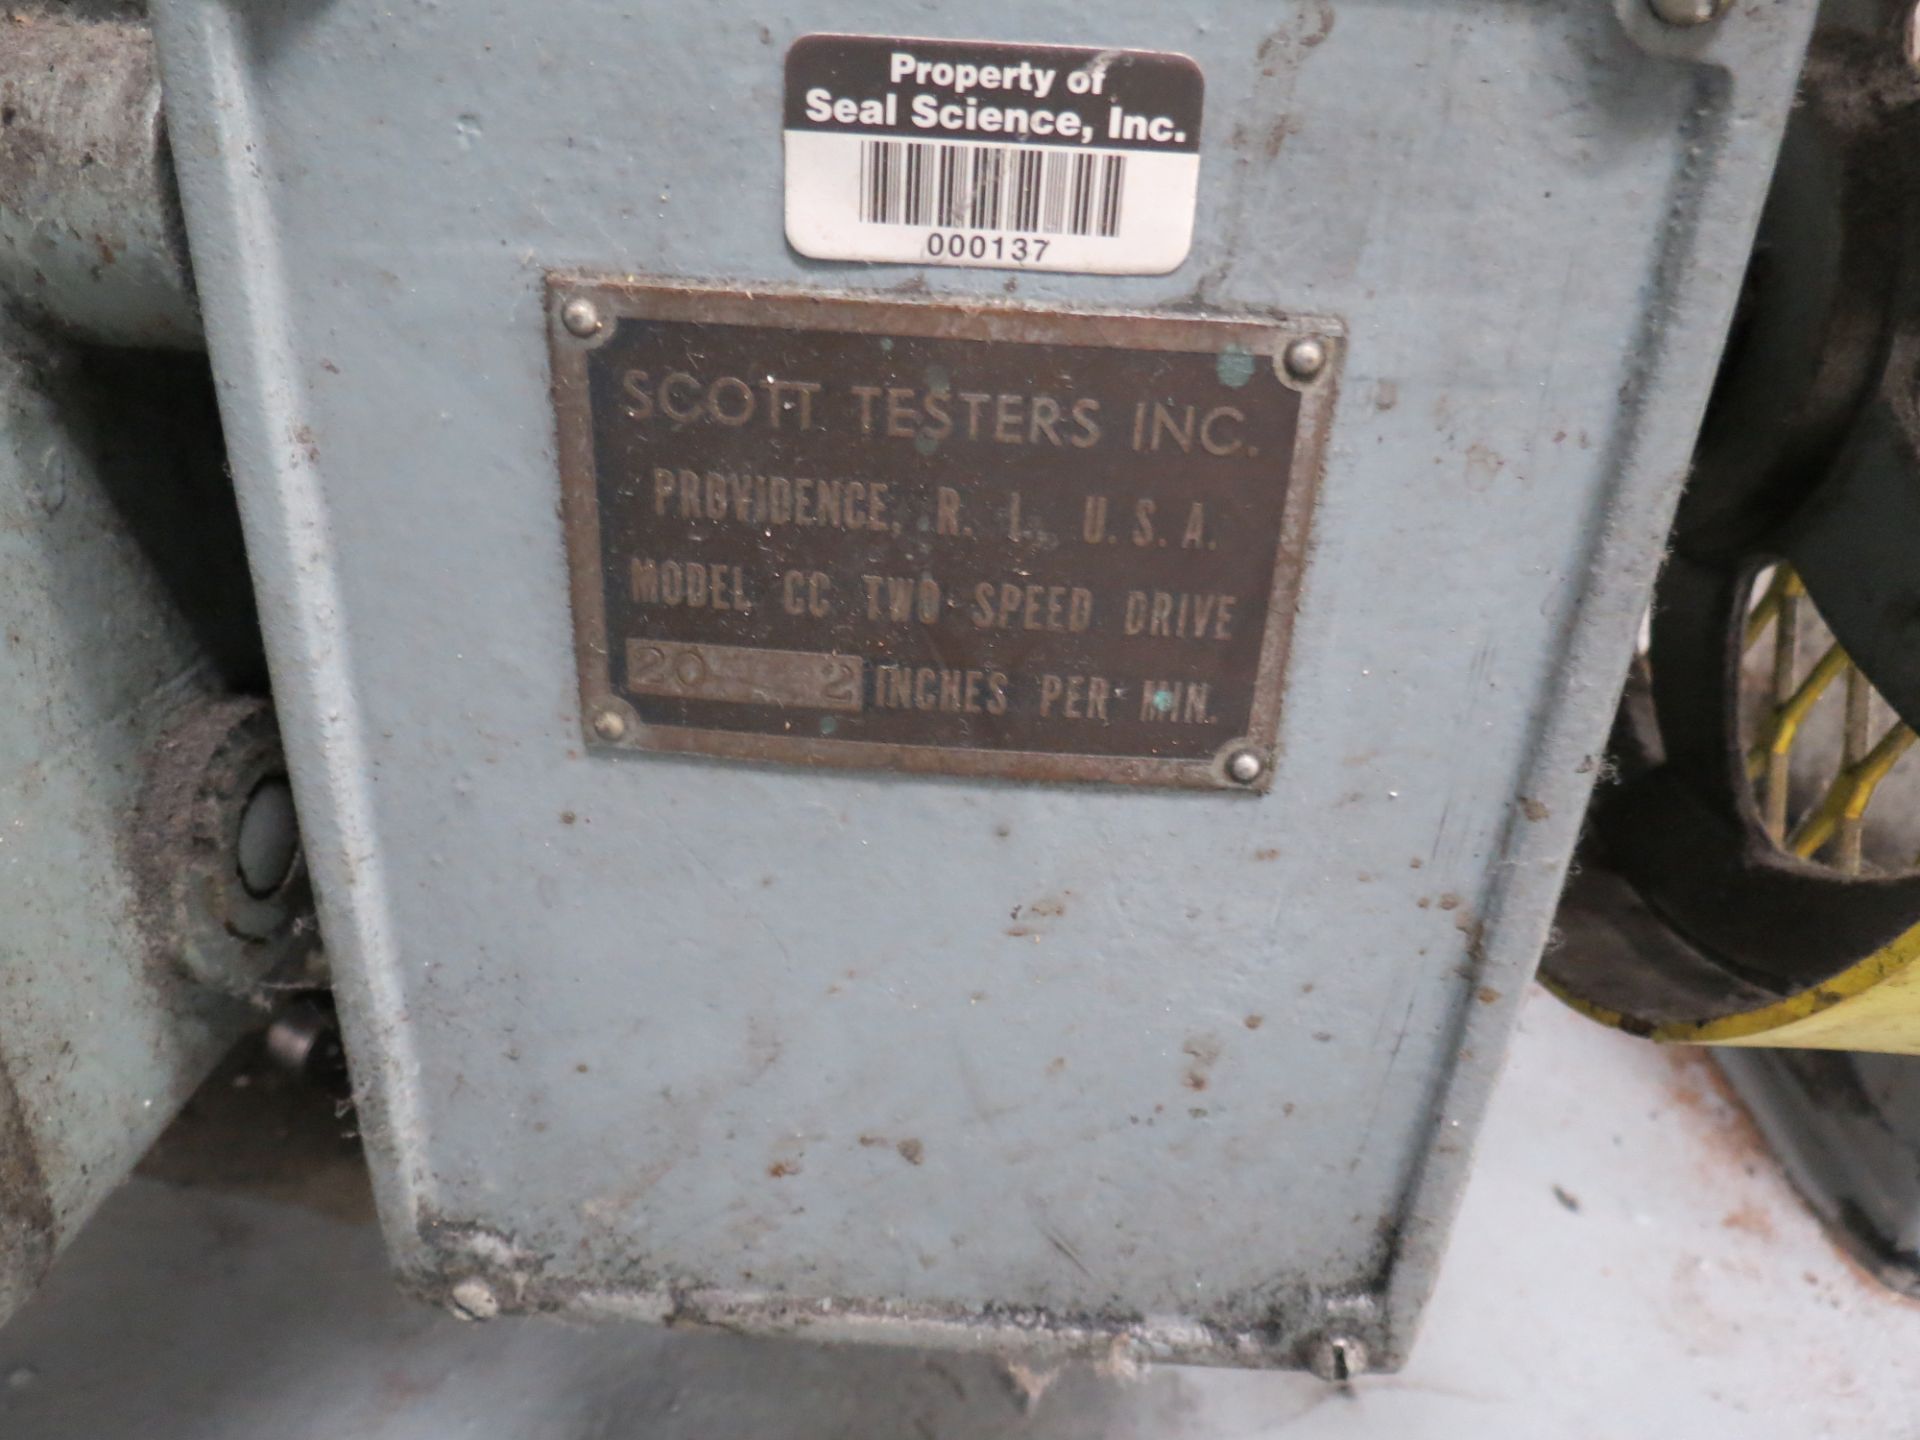 Scott Testers Inc. Model CC Two Speed Drive, Tensile Tester - Image 5 of 5